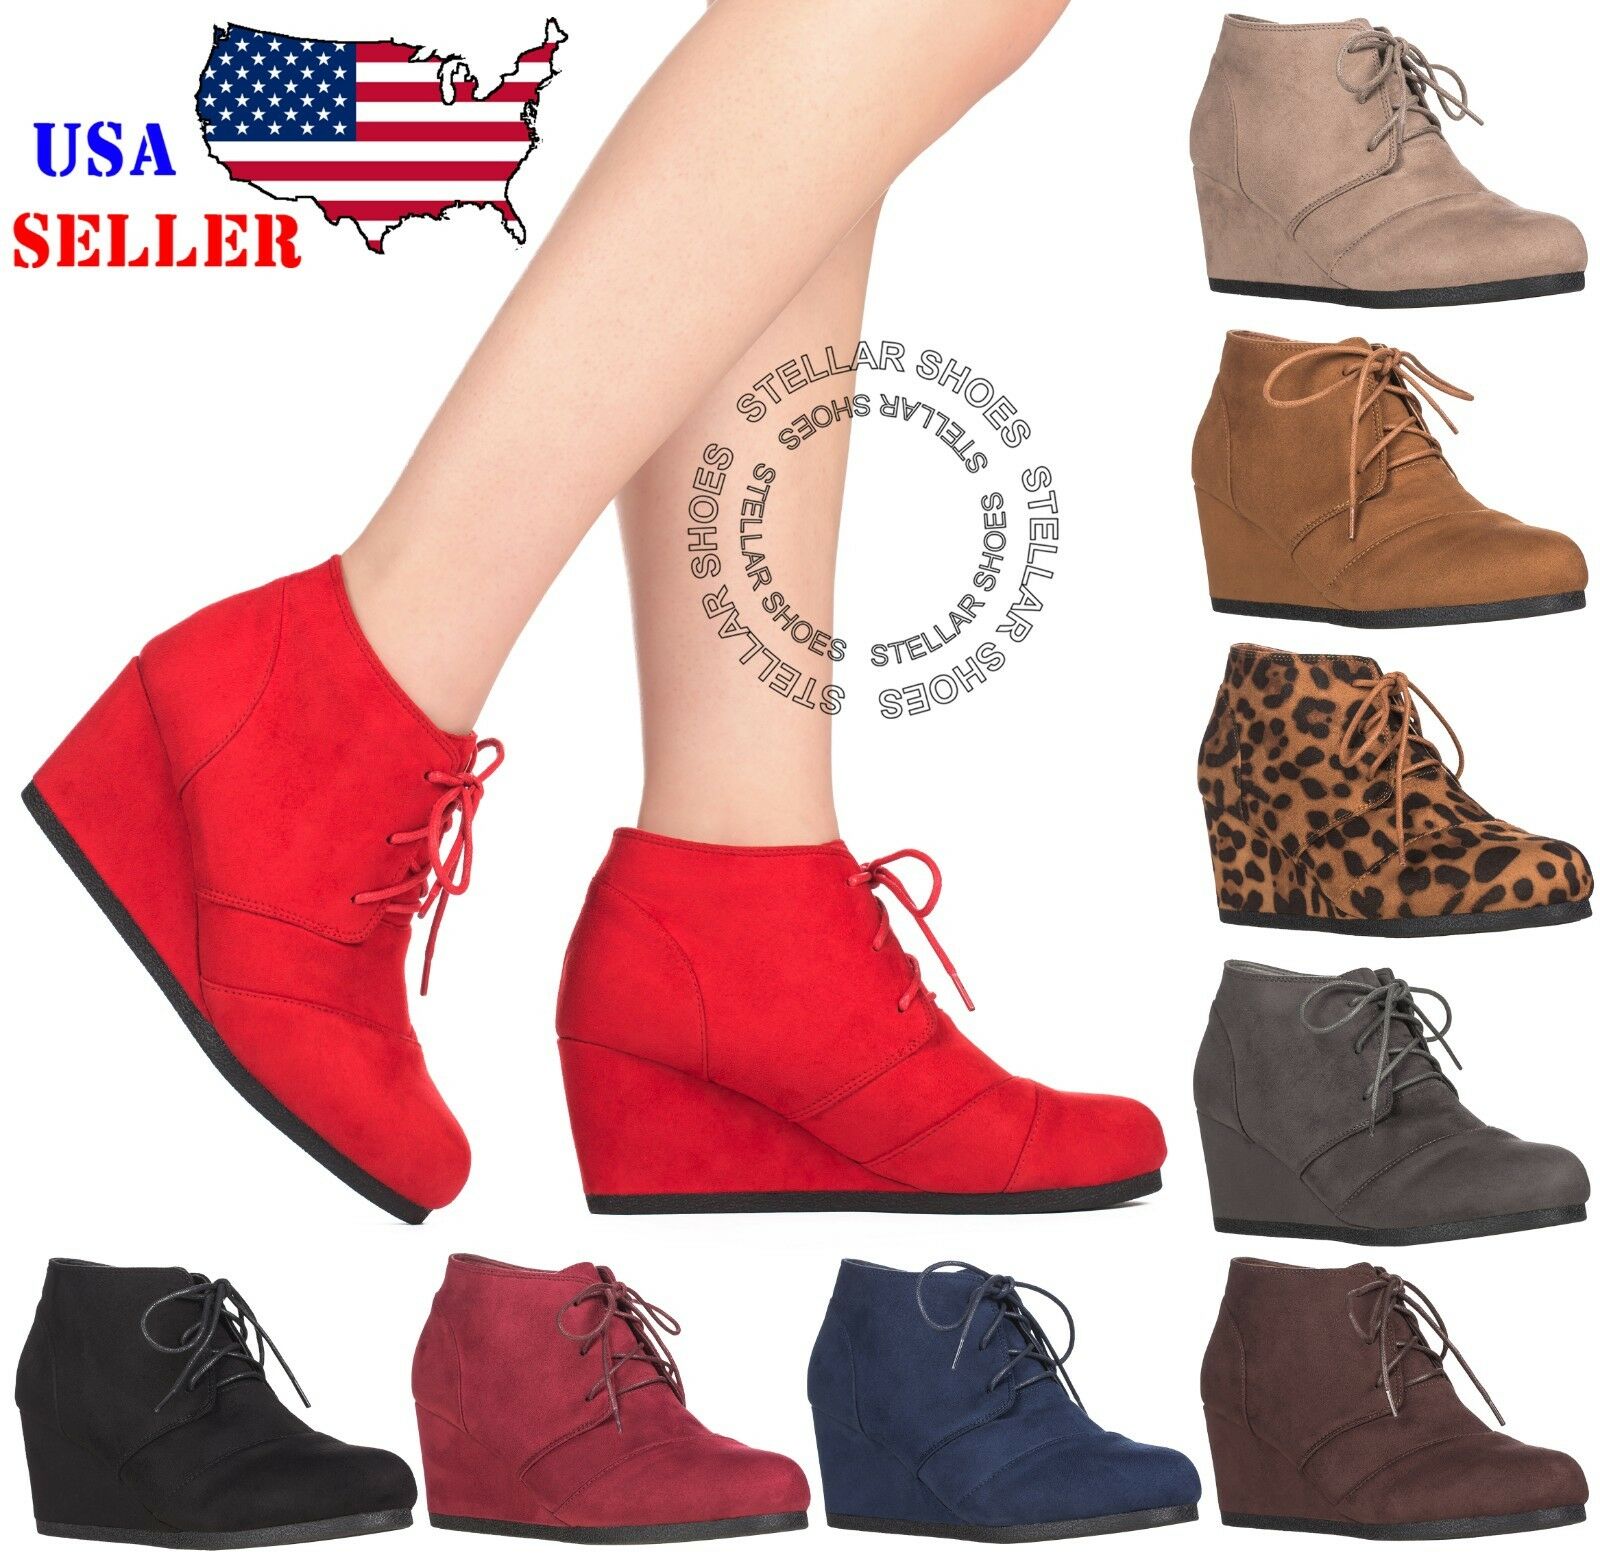 [new] Illude Women's Booties Round Toe Lace Up Wedge Heel Ankle Boots